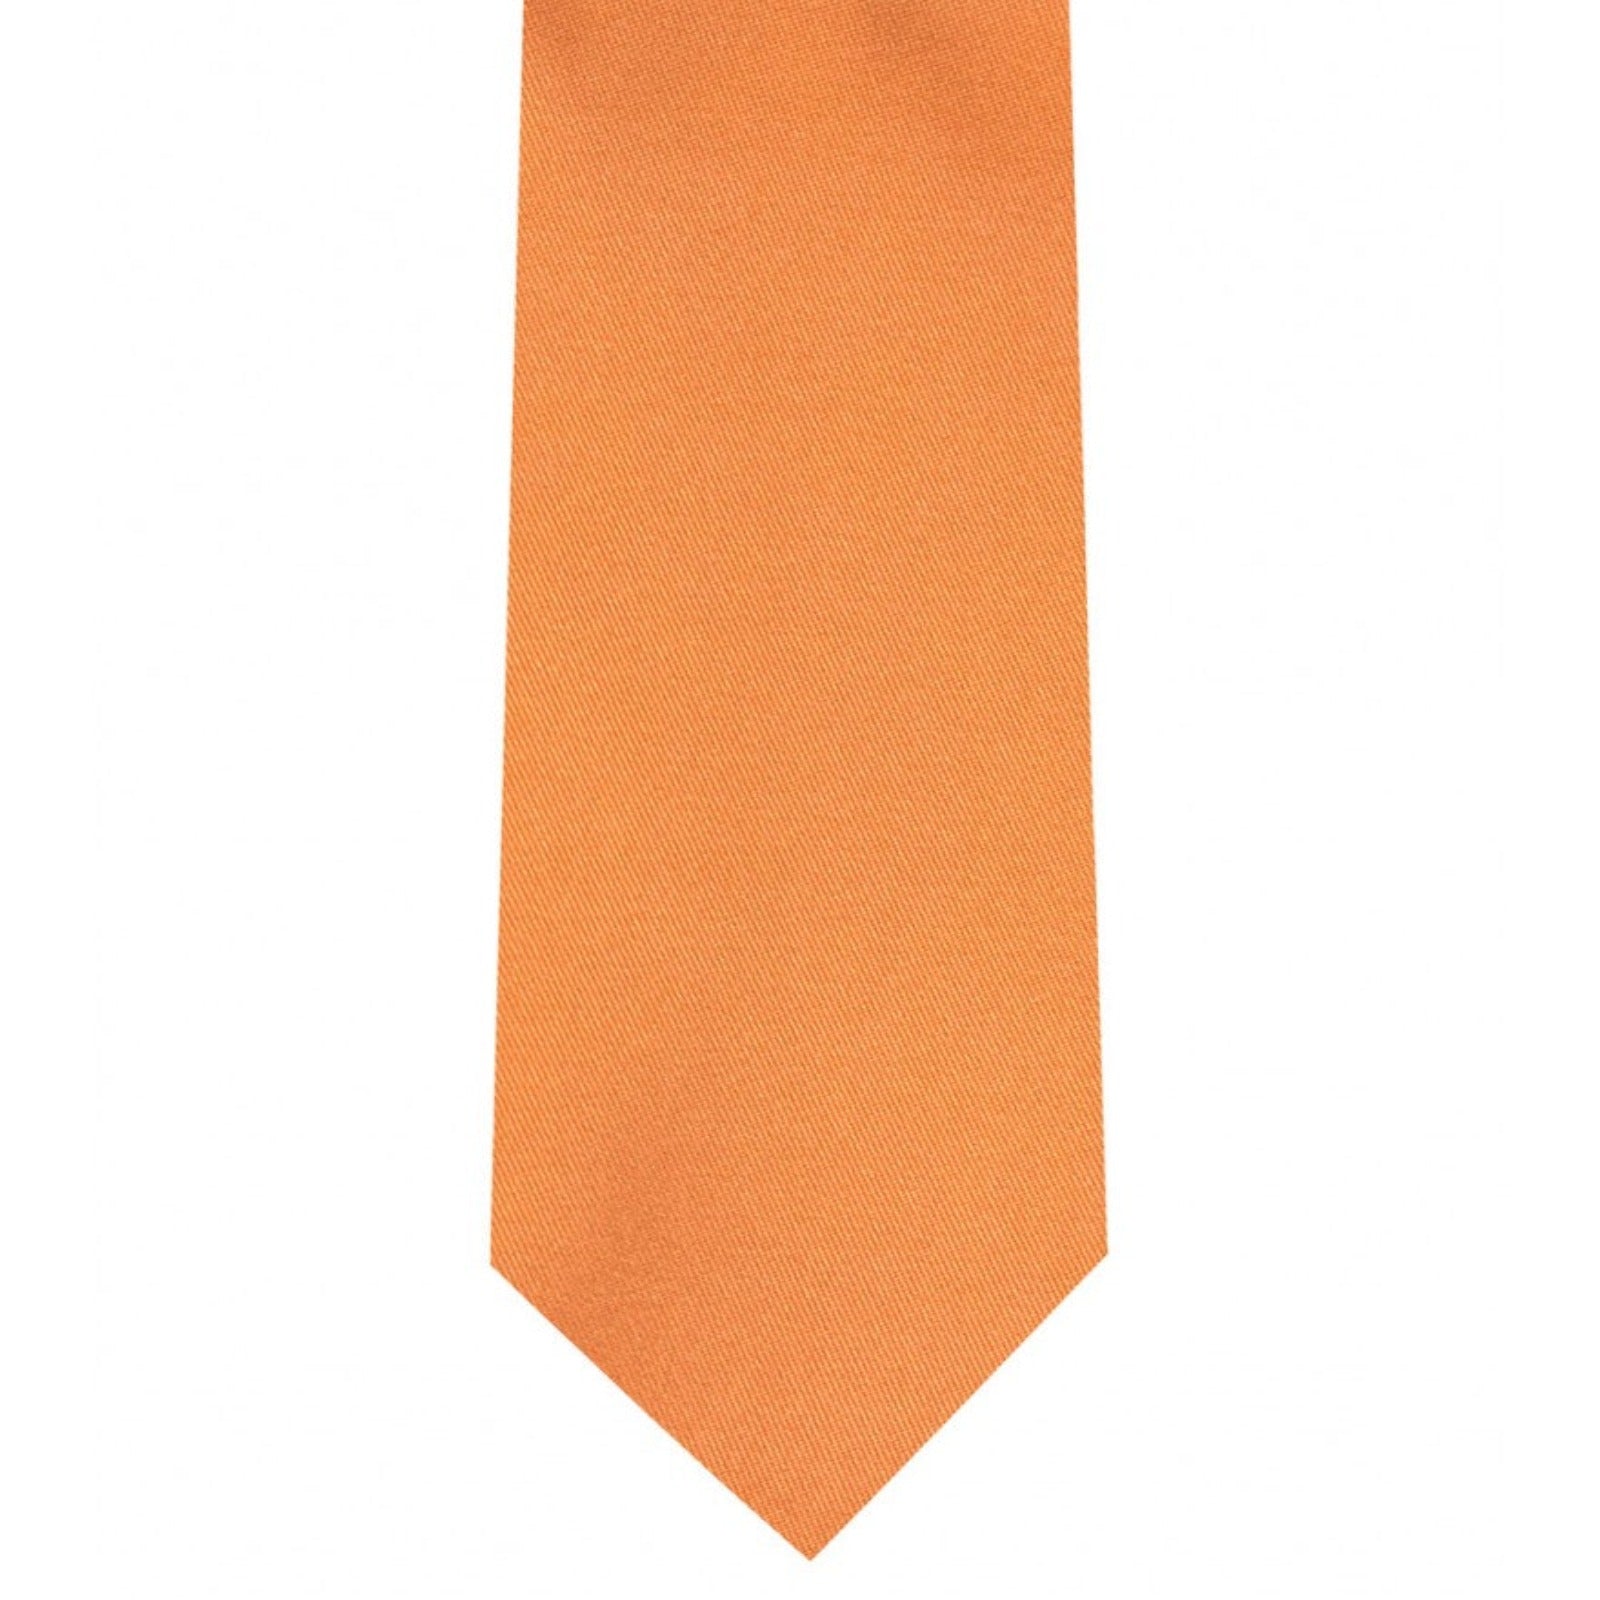 Classic Salmon Orange Tie Ultra Skinny tie width 2.25 inches With Matching Pocket Square | KCT Menswear